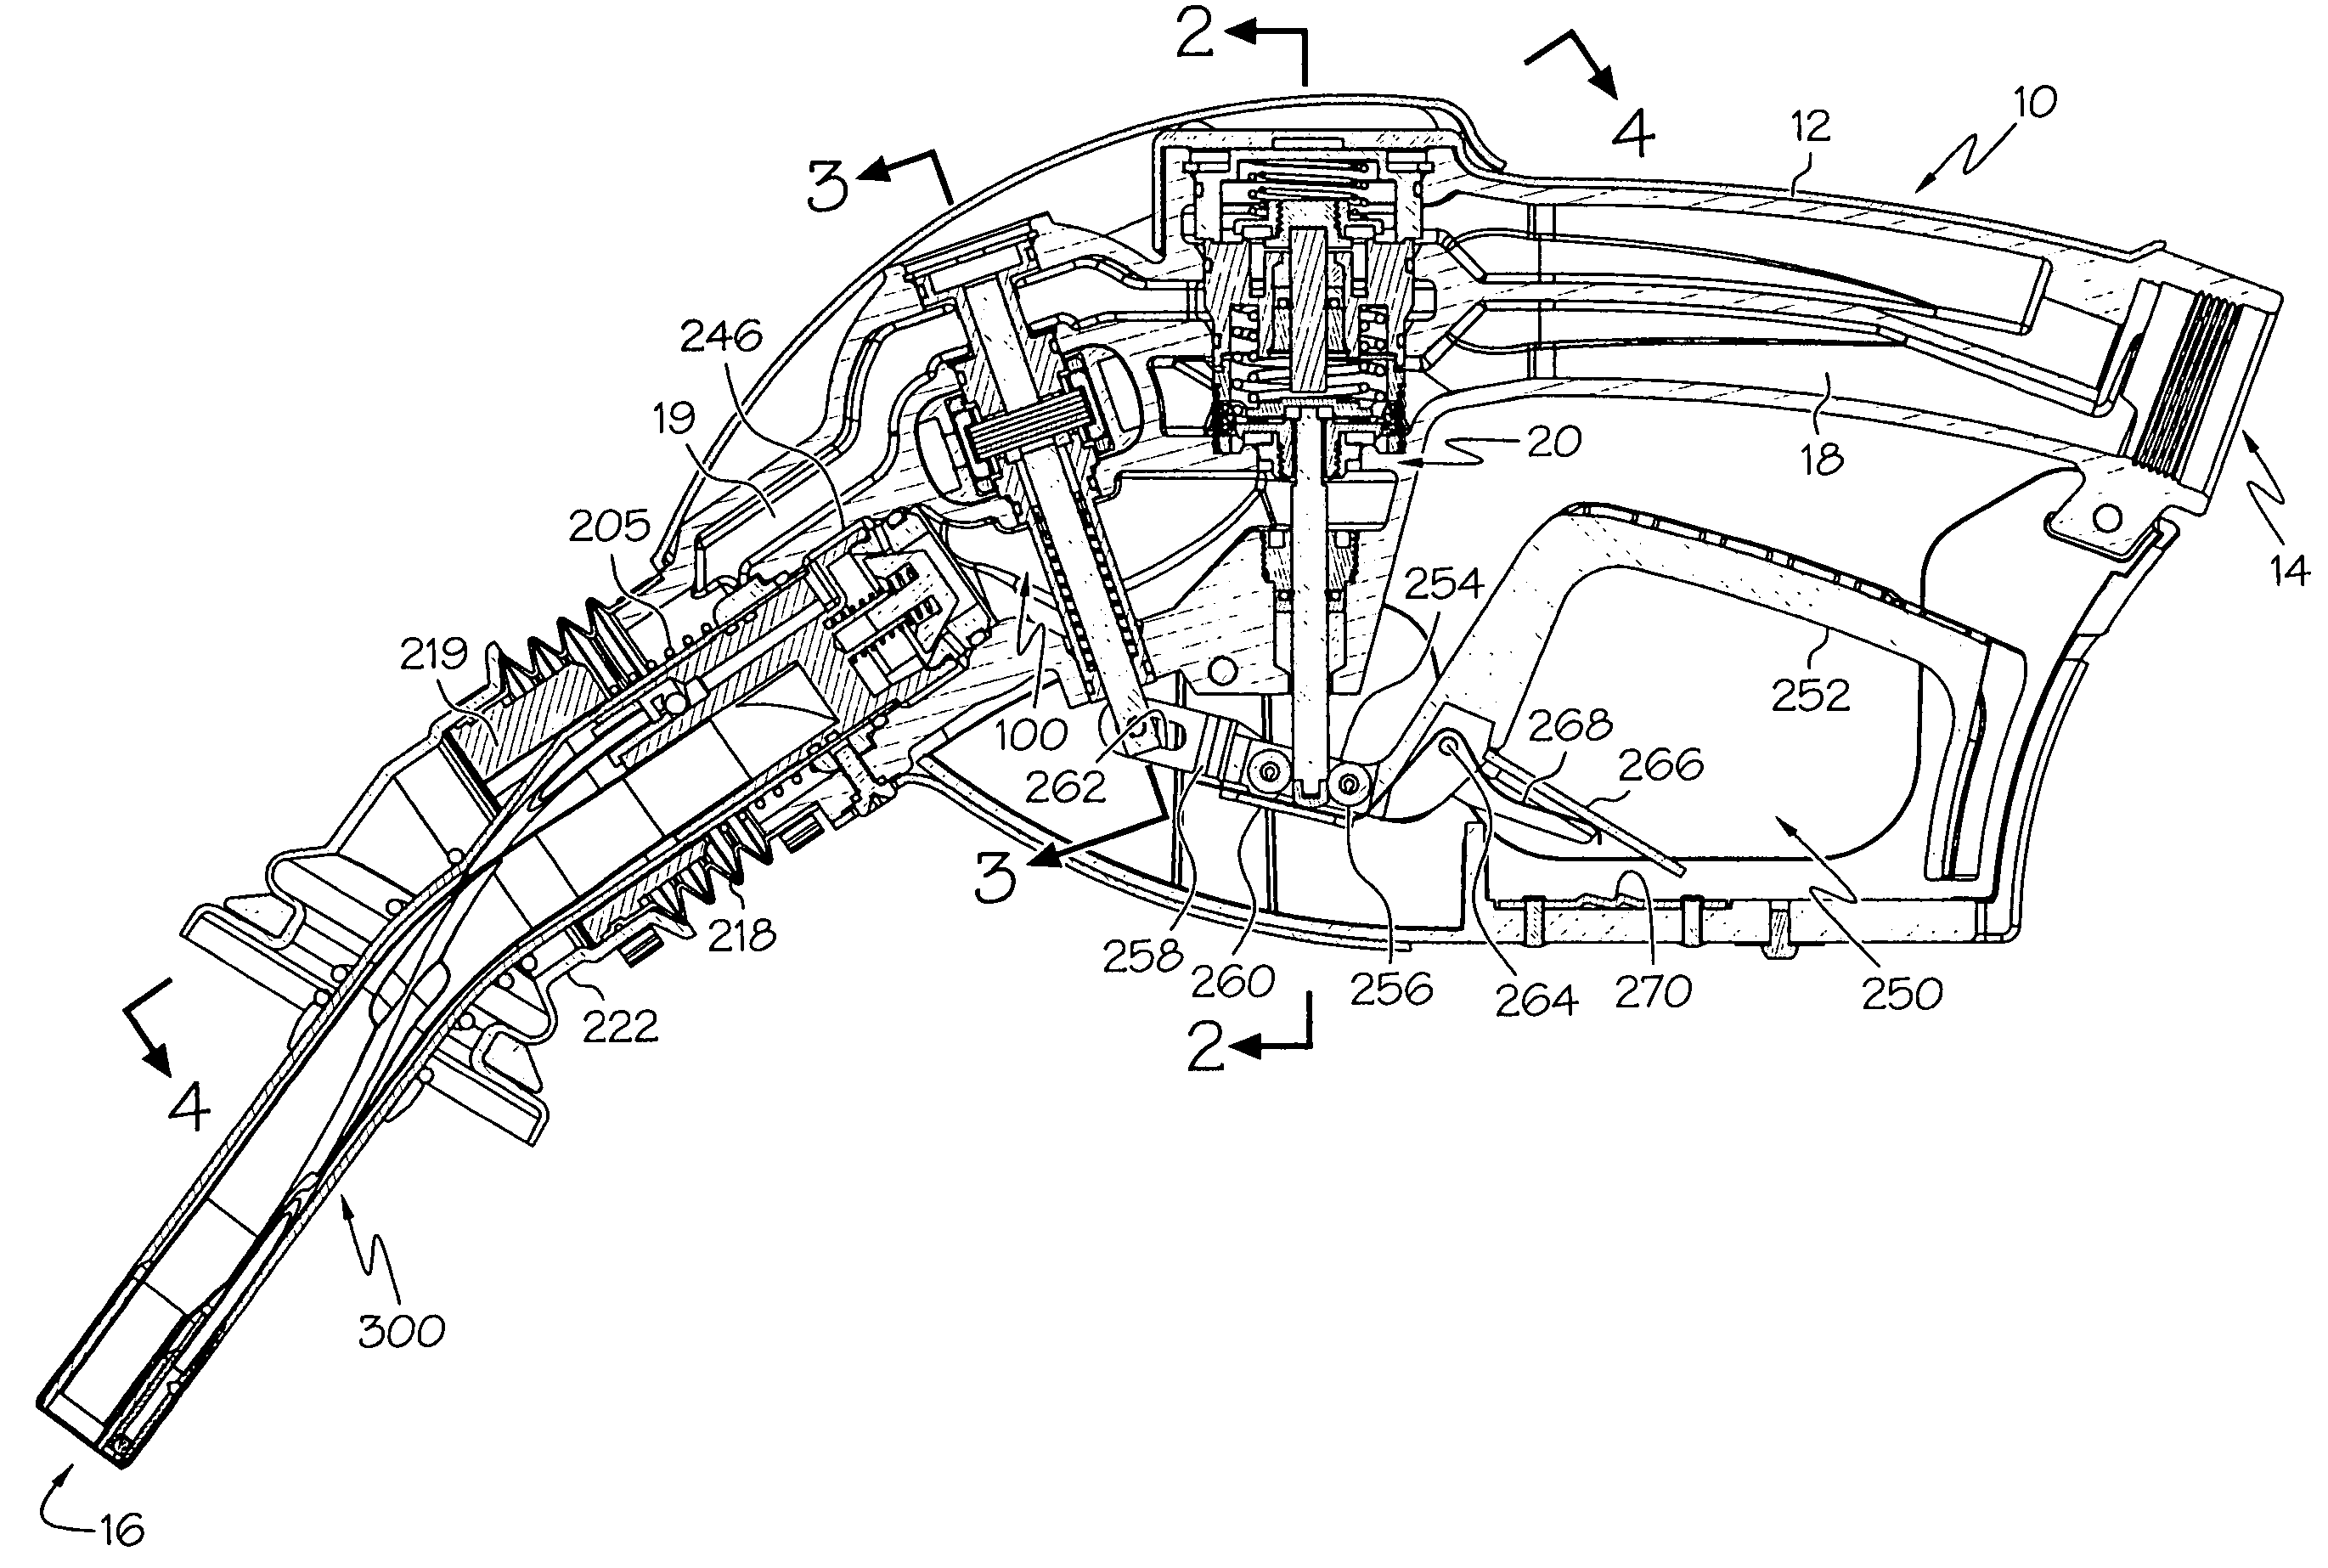 Spout assembly for dispensing liquid from a nozzle